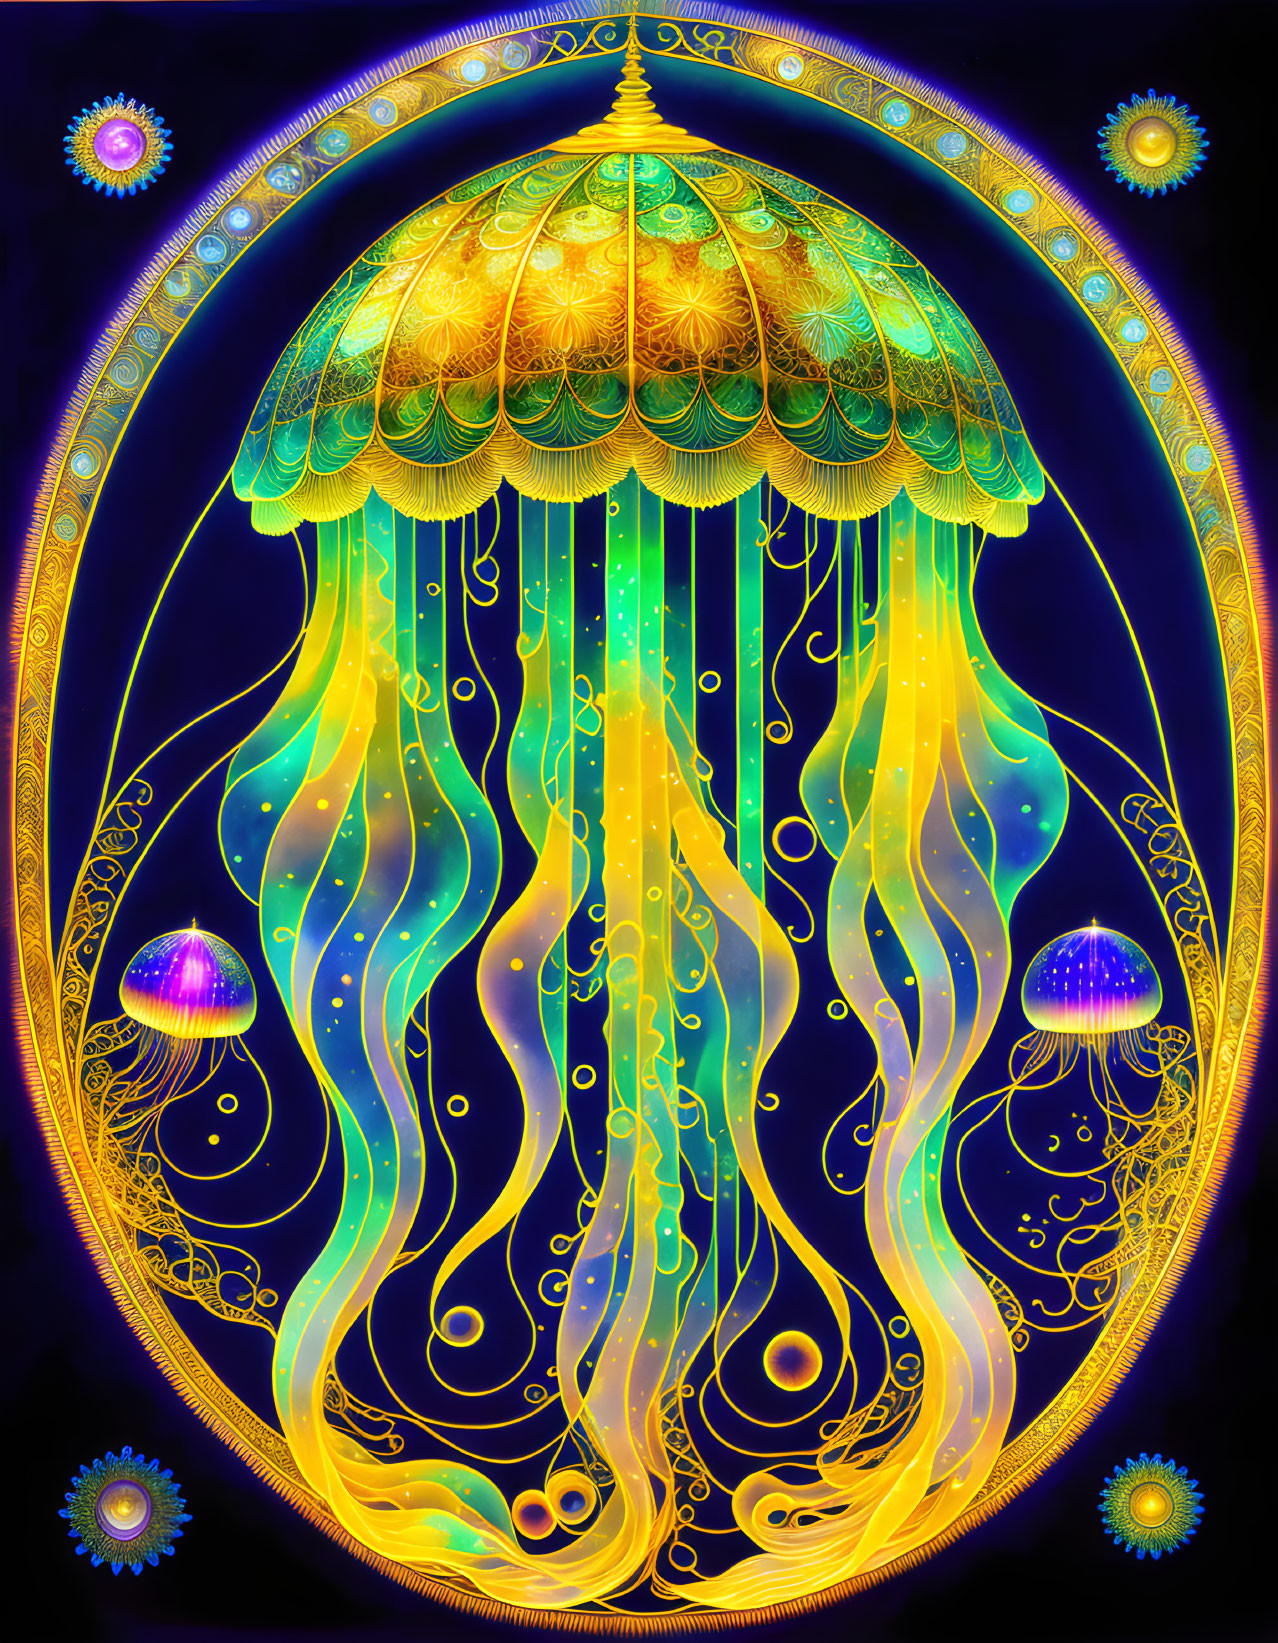 Colorful Jellyfish with Golden Dome and Neon Tentacles on Dark Background